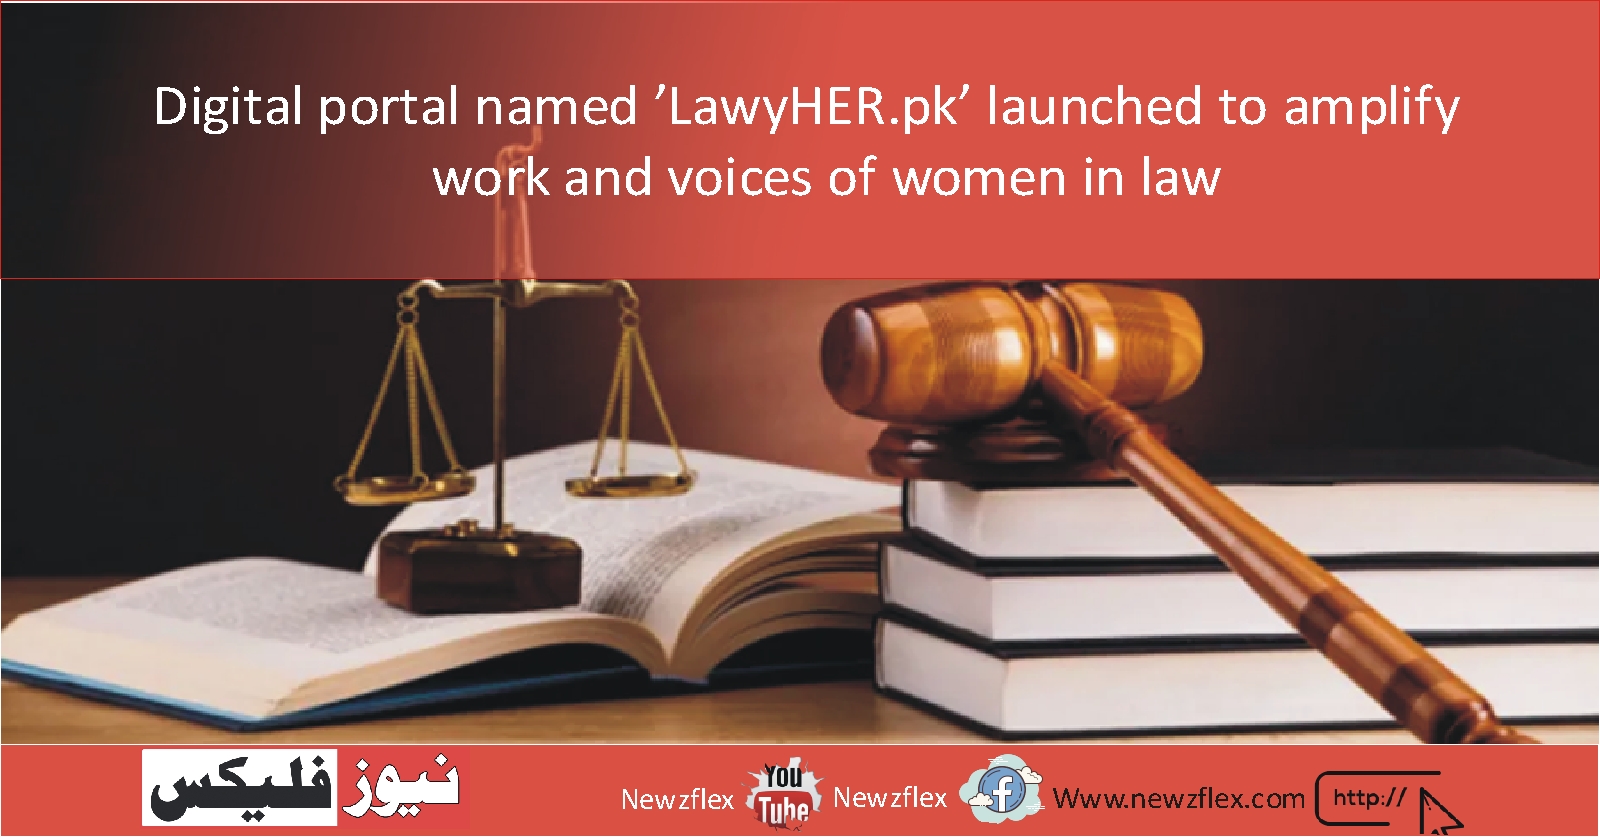 Digital portal named ’LawyHER.pk’ launched to amplify work and voices of women in law